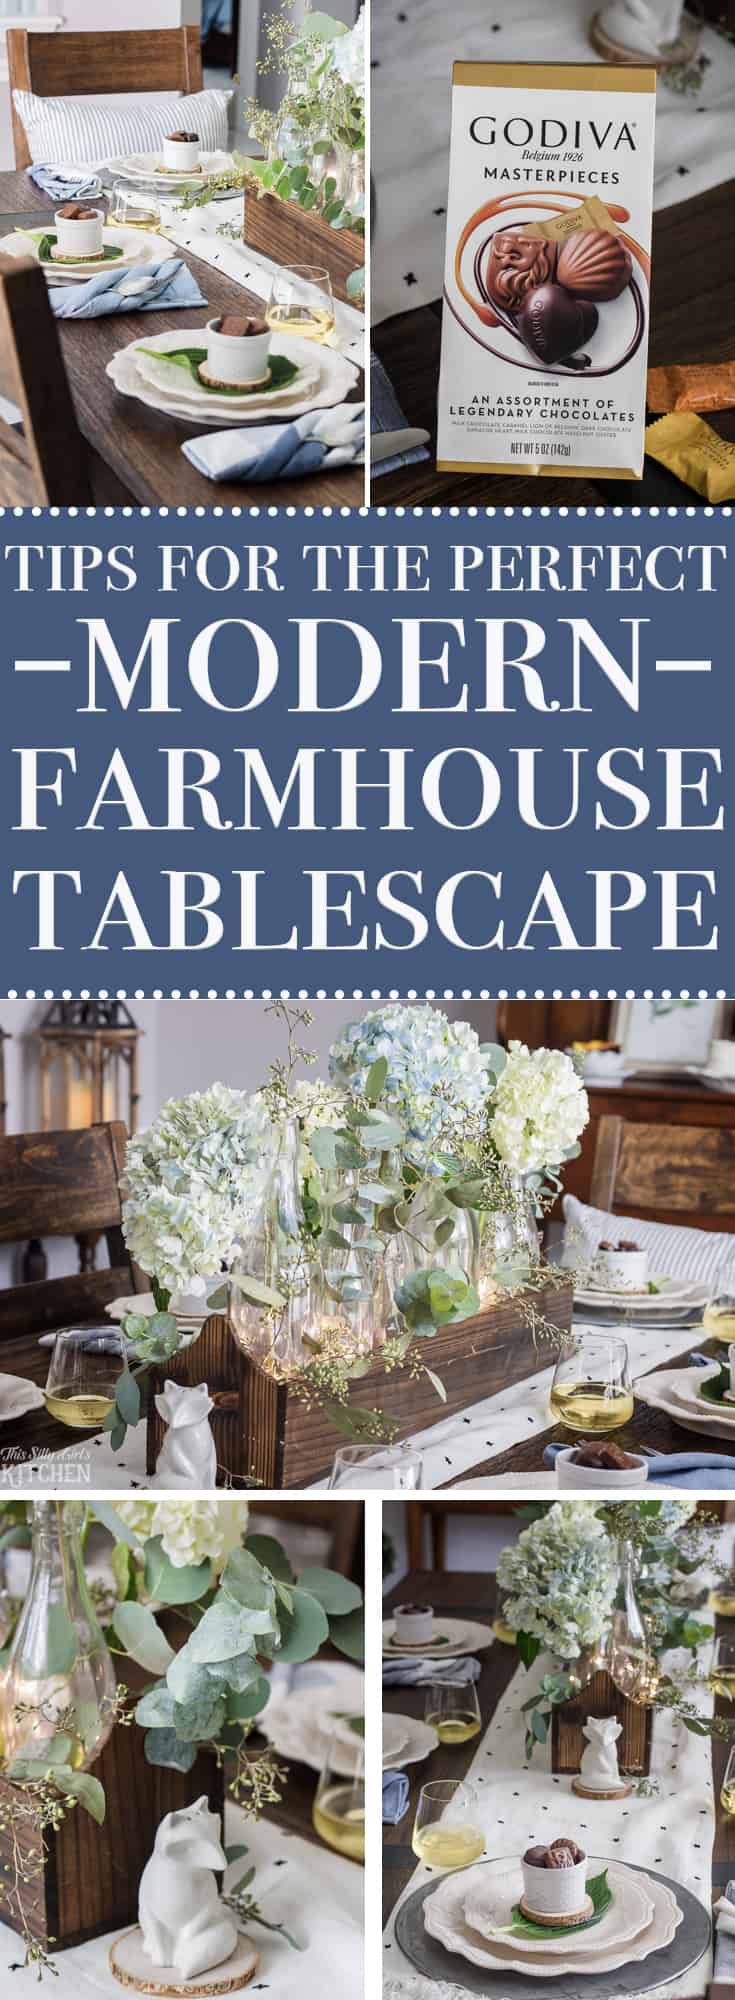 Modern Farmhouse Tablescape, a charming and inviting way to decorate for any party! From ThisSillyGirlsKitchen.com